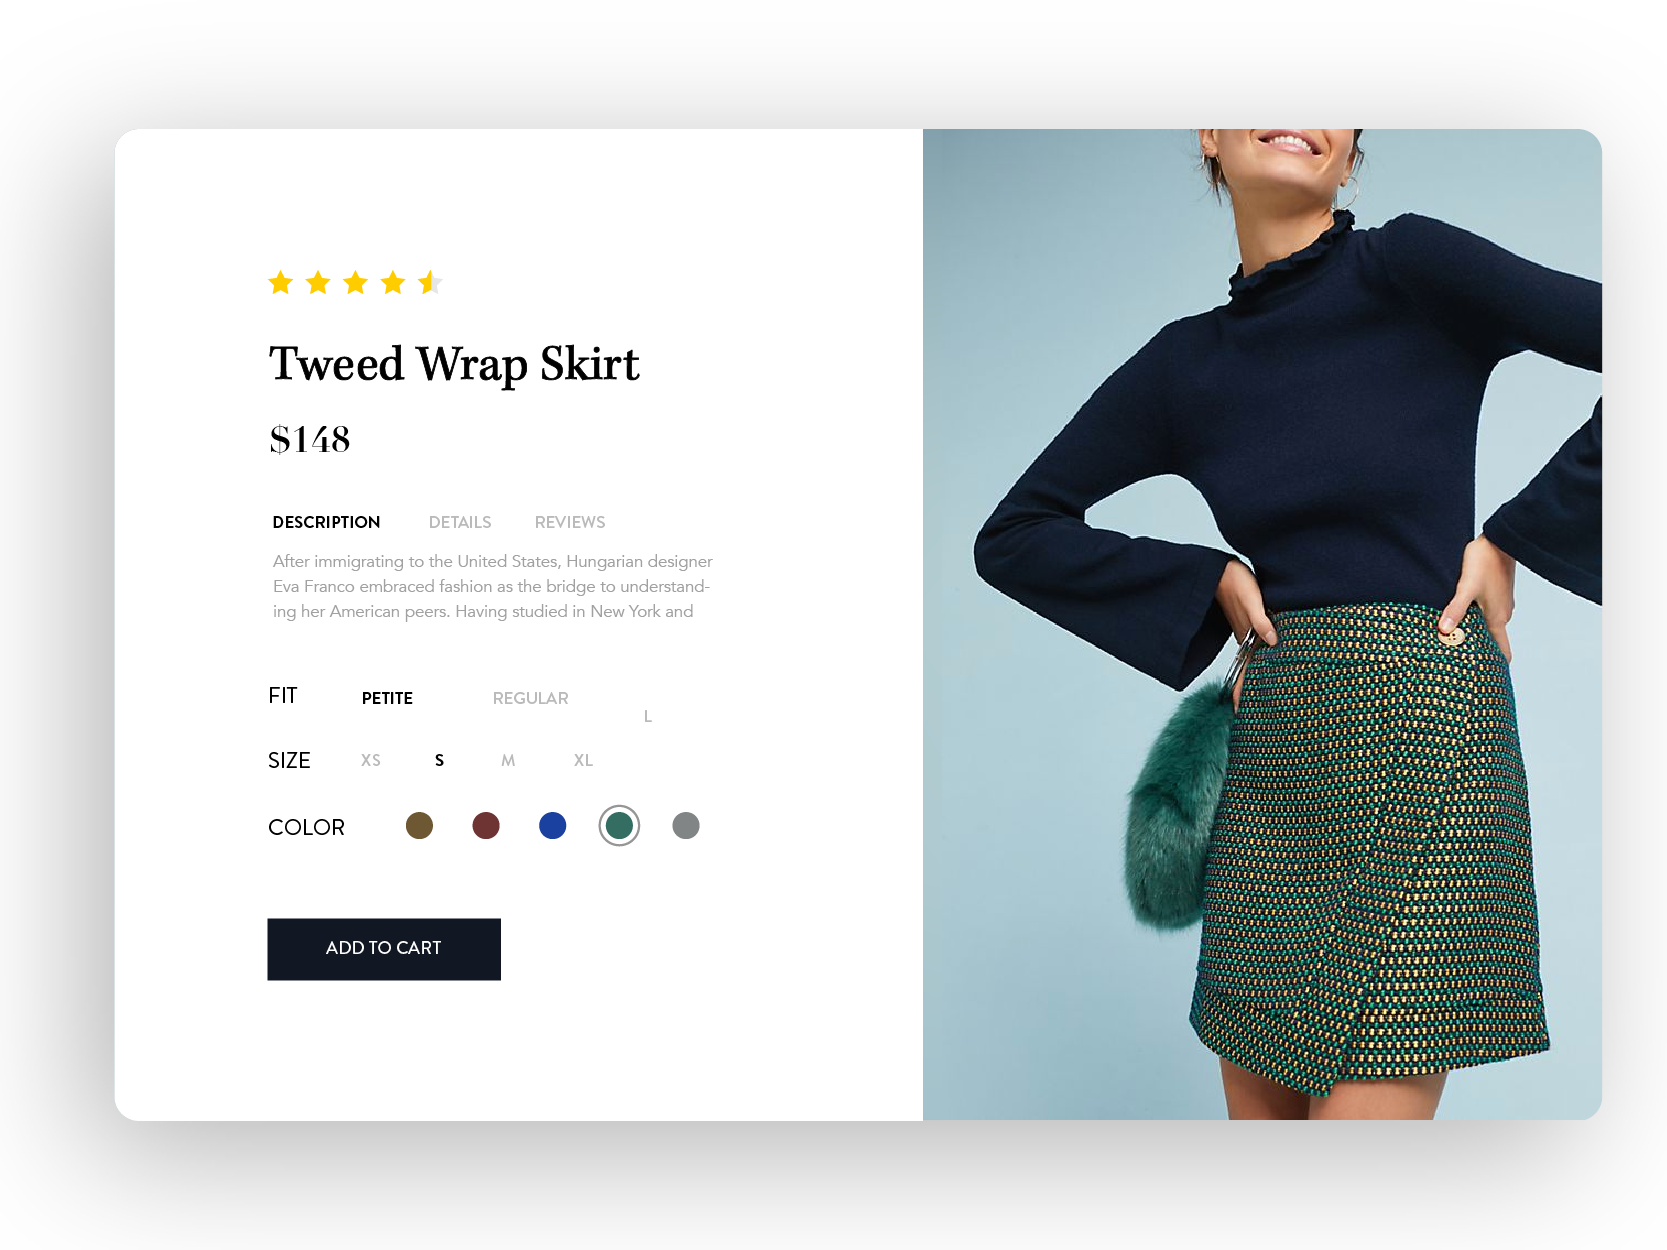 Daily Ui Challenge 033 - Customize Product by Andrea Eppy on Dribbble